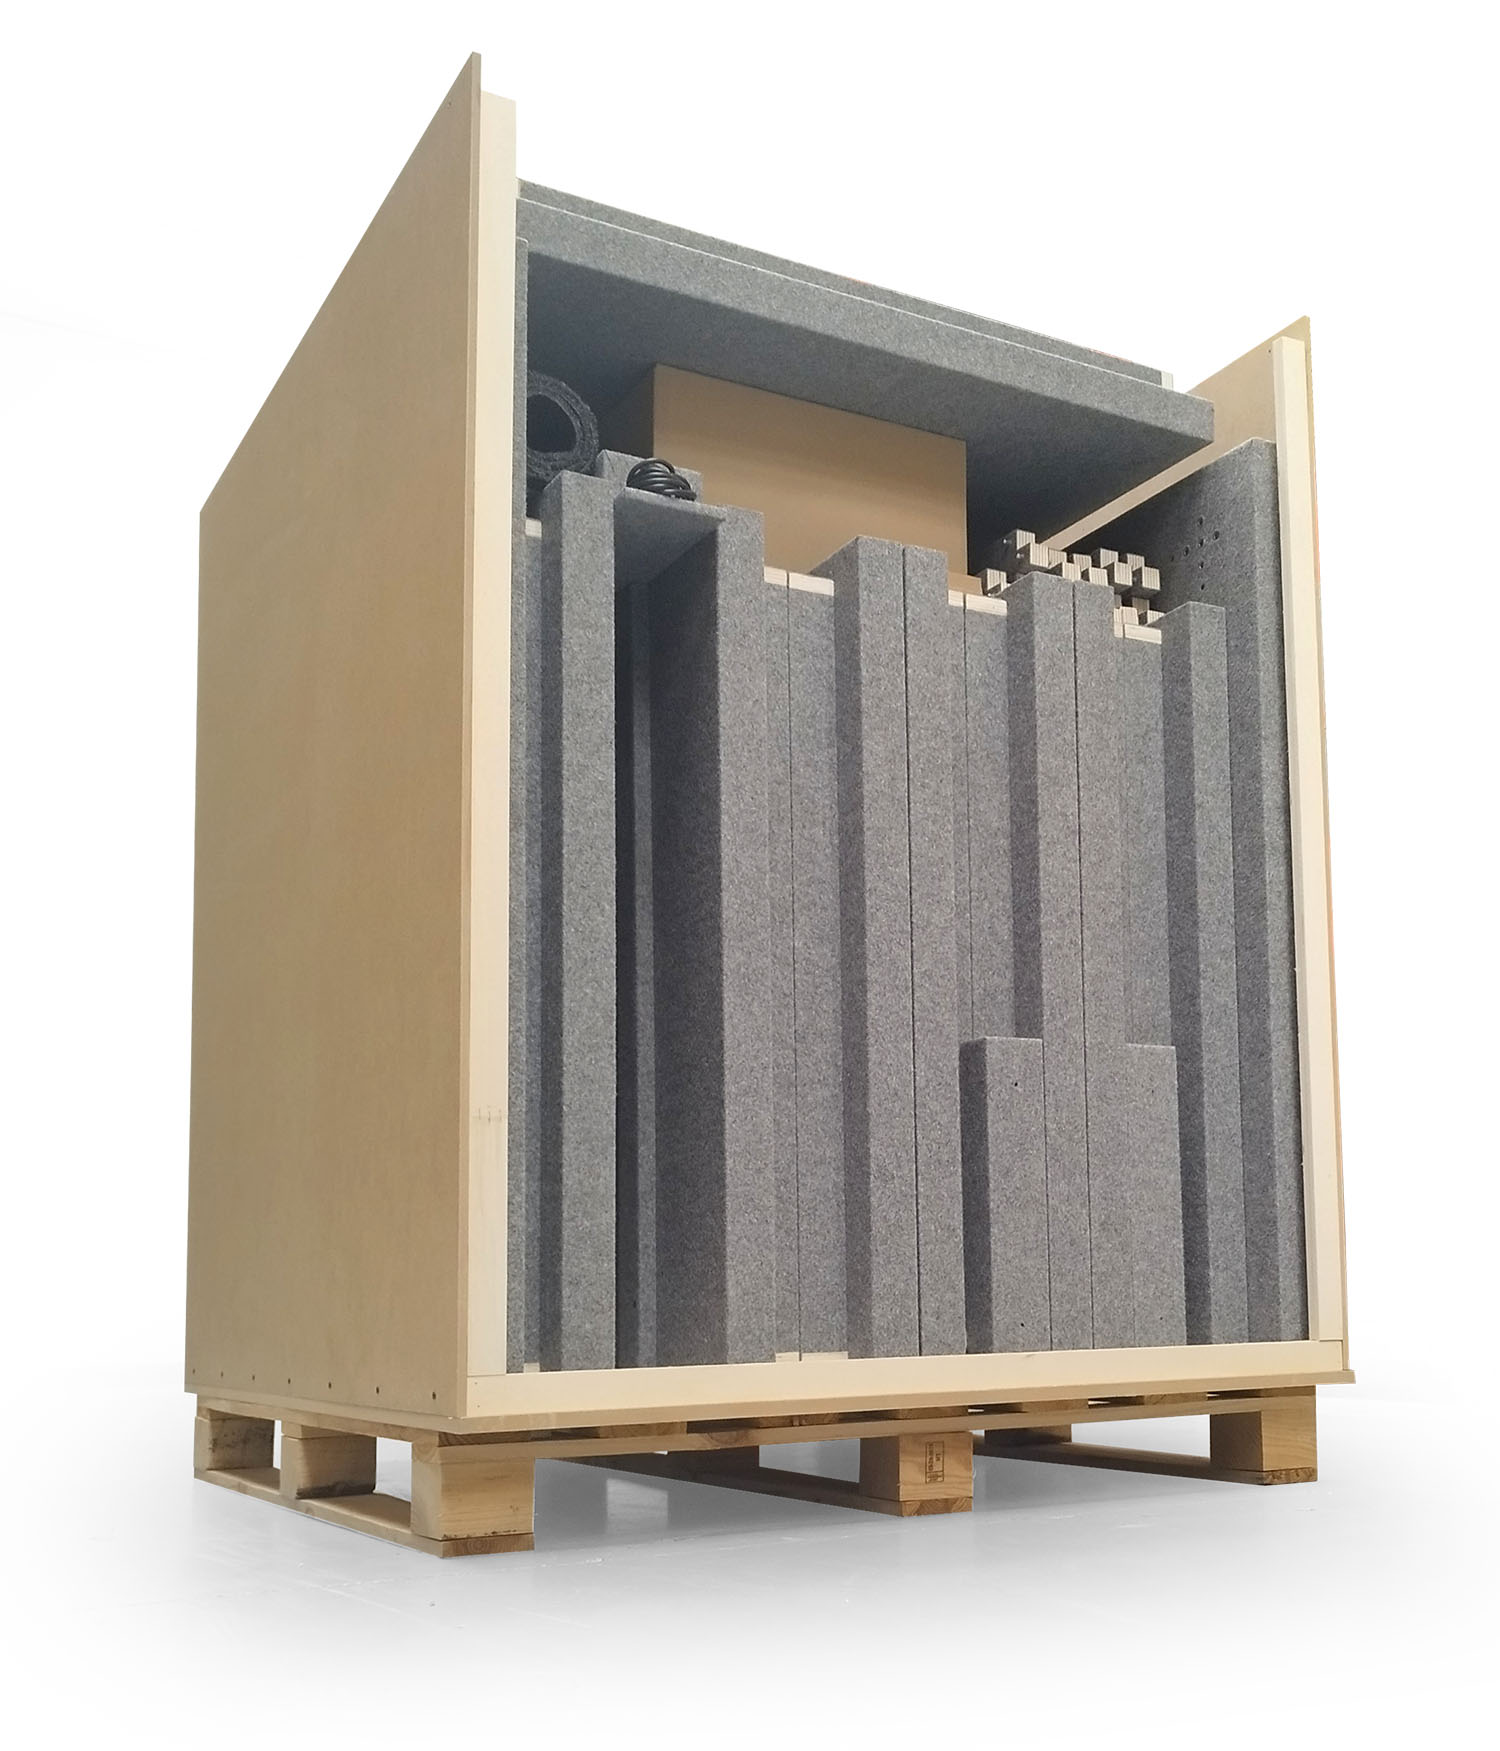 Soundproof booth packaging